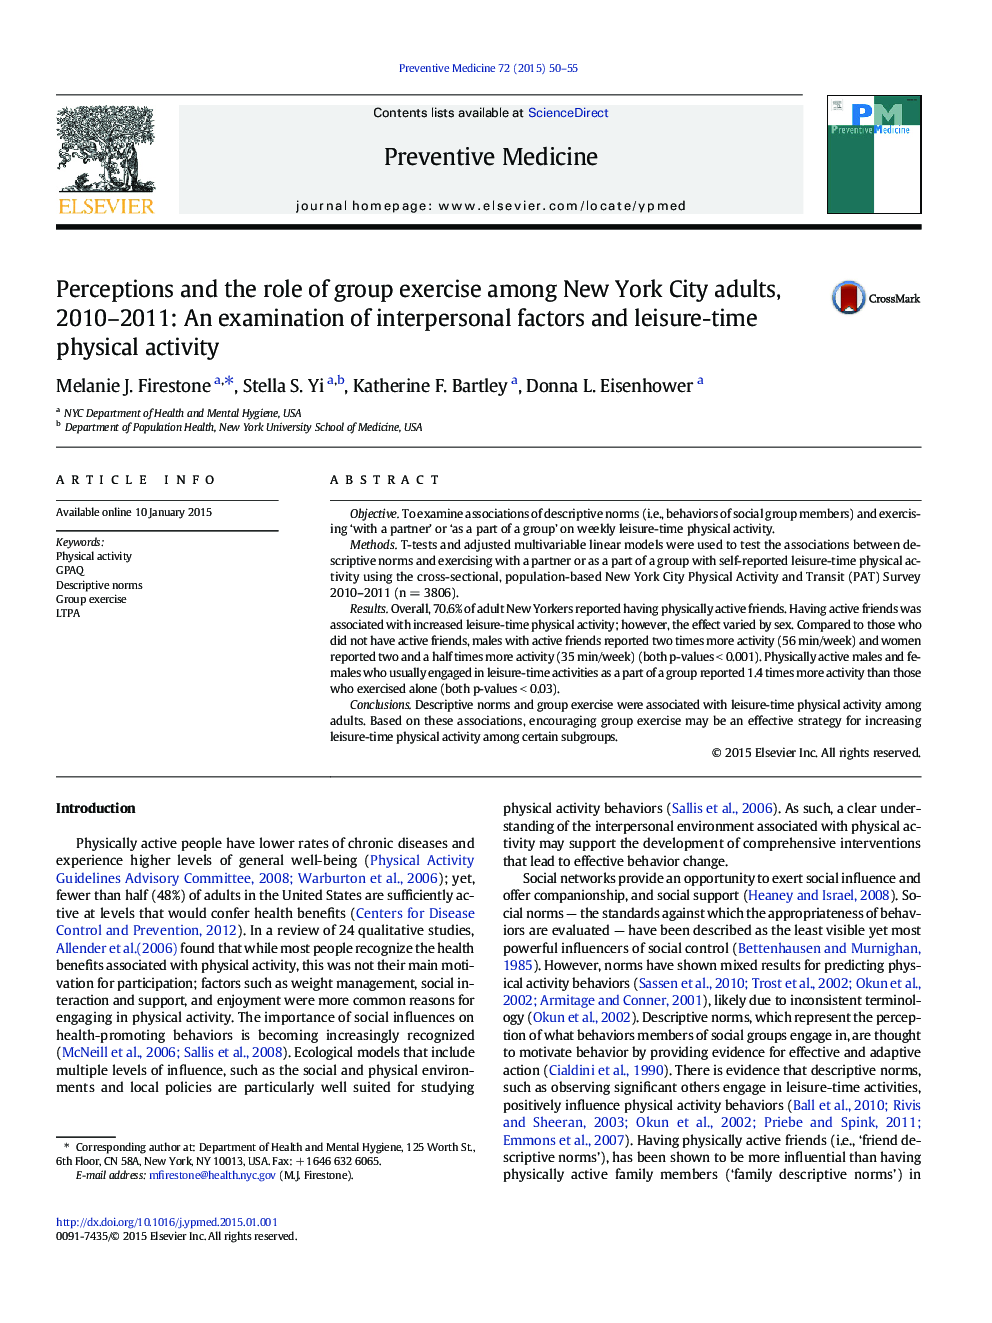 Perceptions and the role of group exercise among New York City adults, 2010–2011: An examination of interpersonal factors and leisure-time physical activity